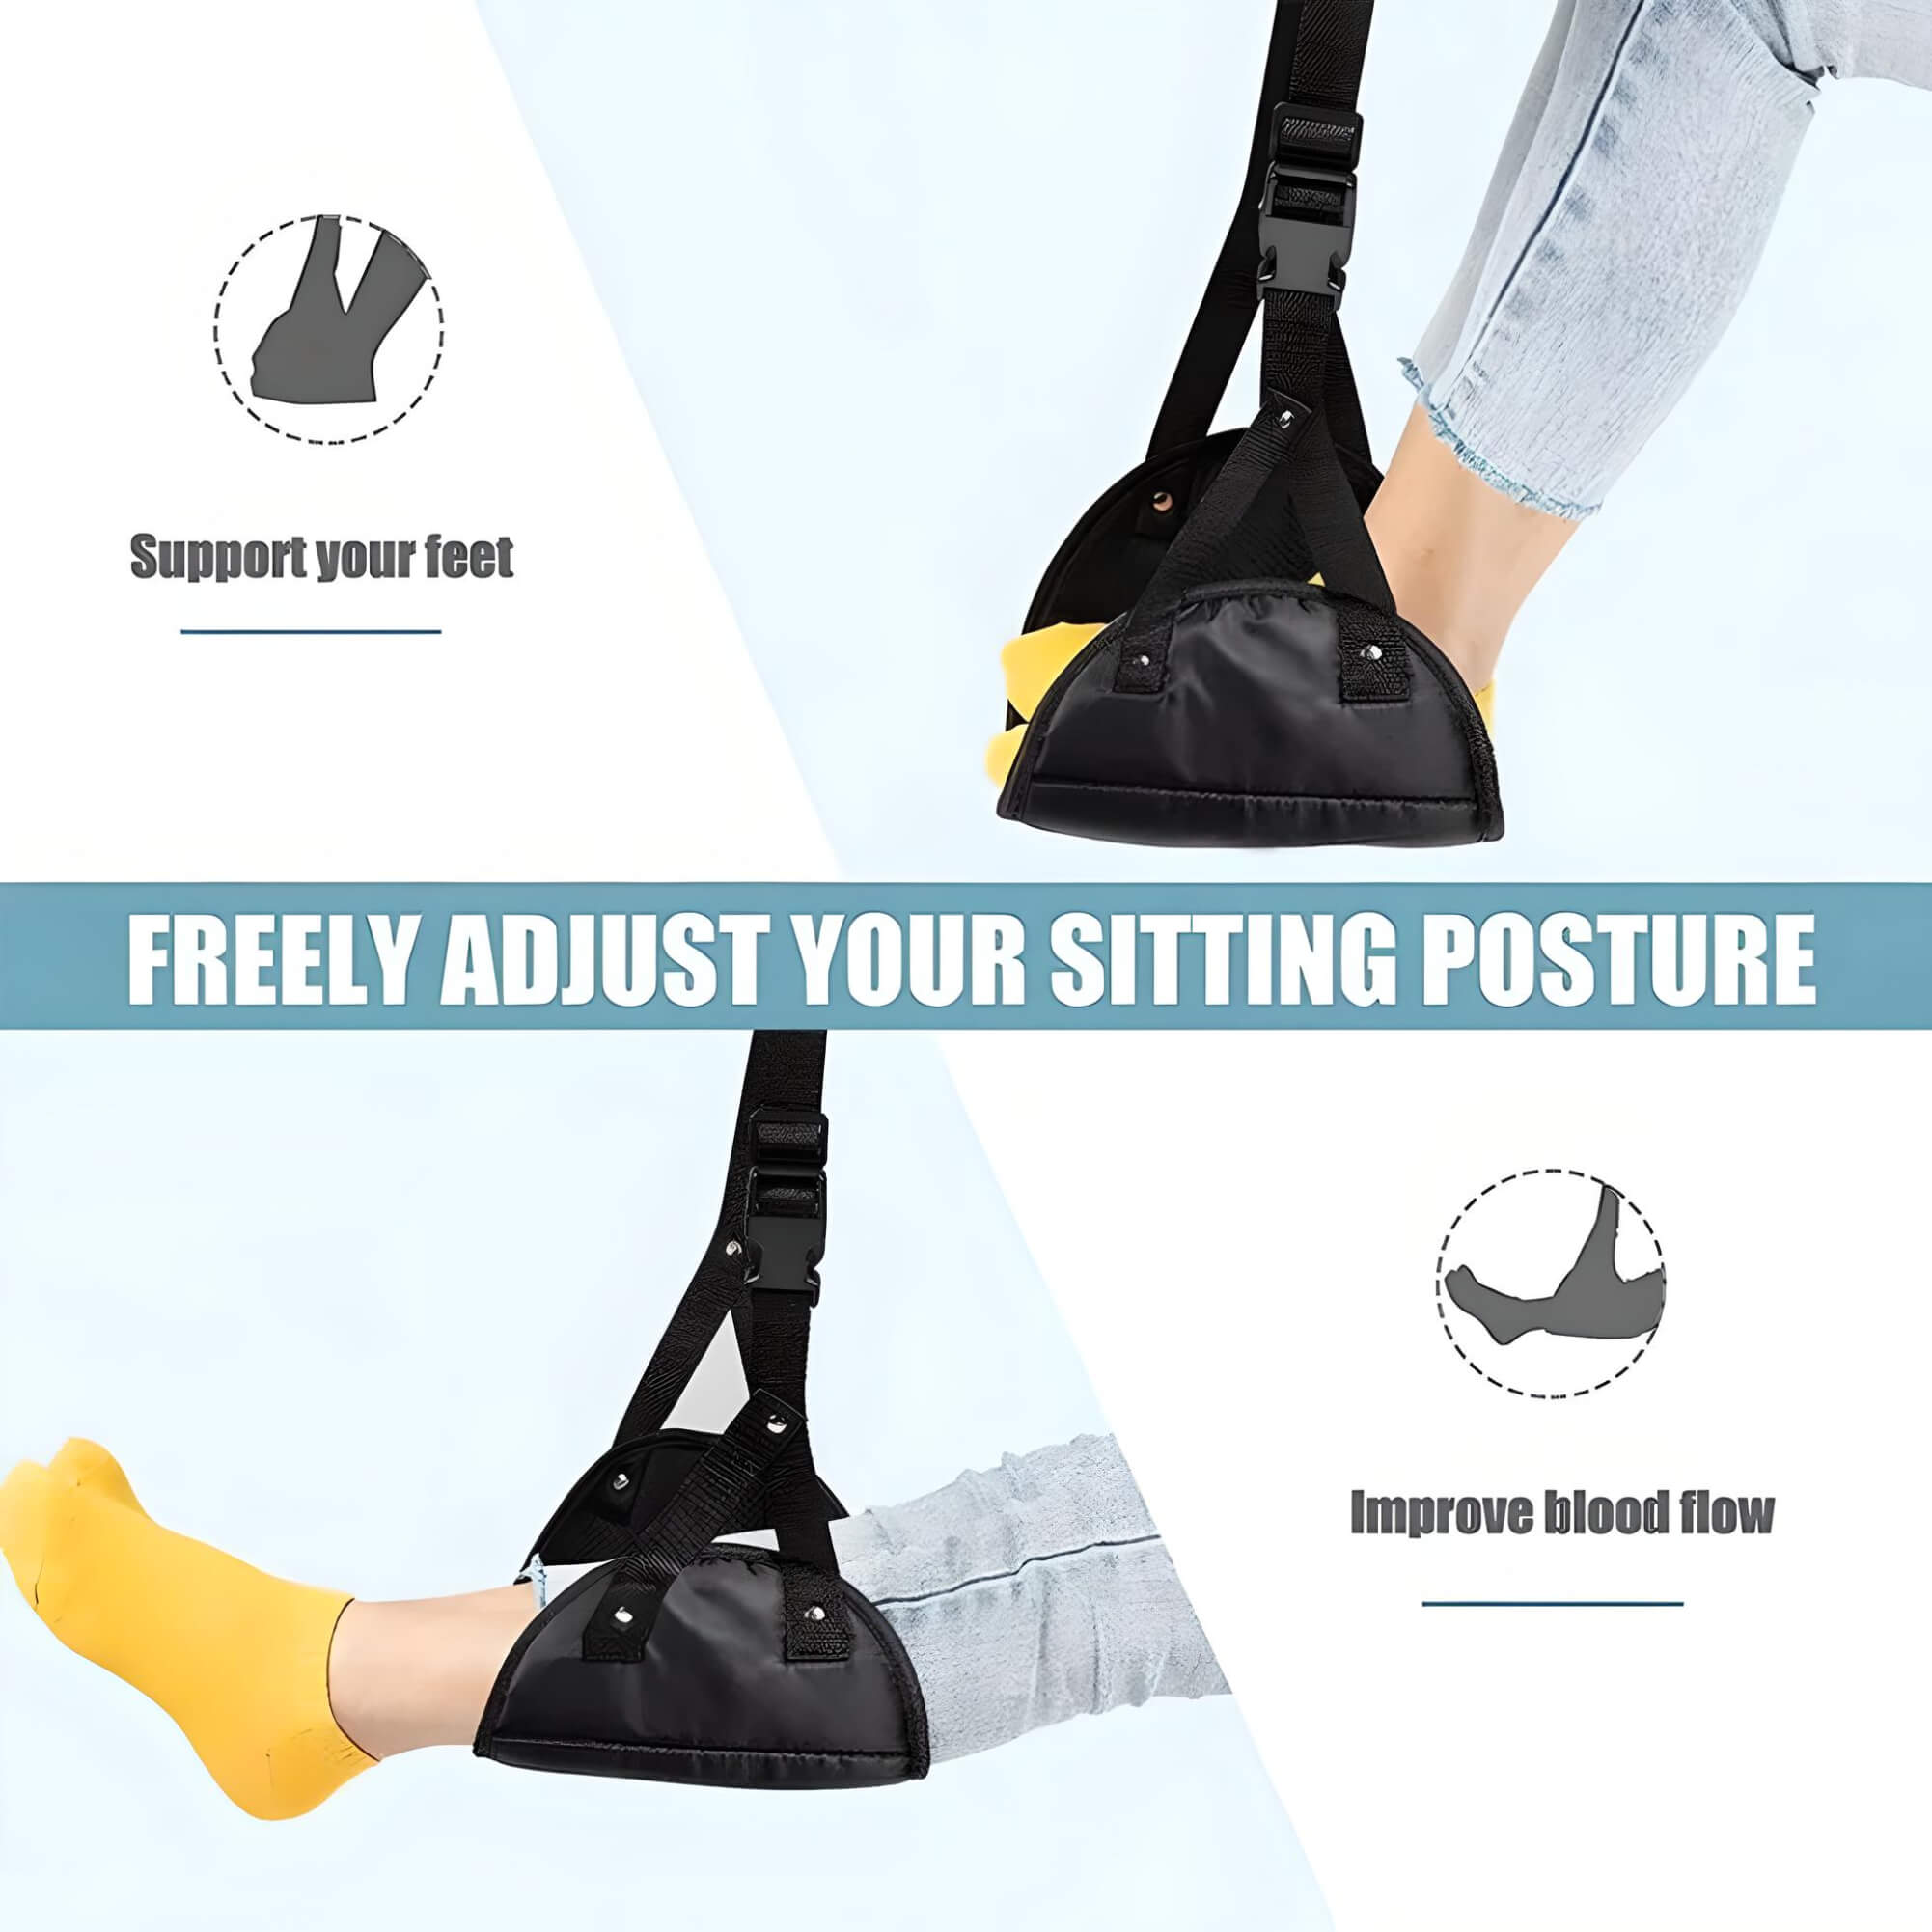 office-foot-hammock-free-ad-just-your-sitting-posture